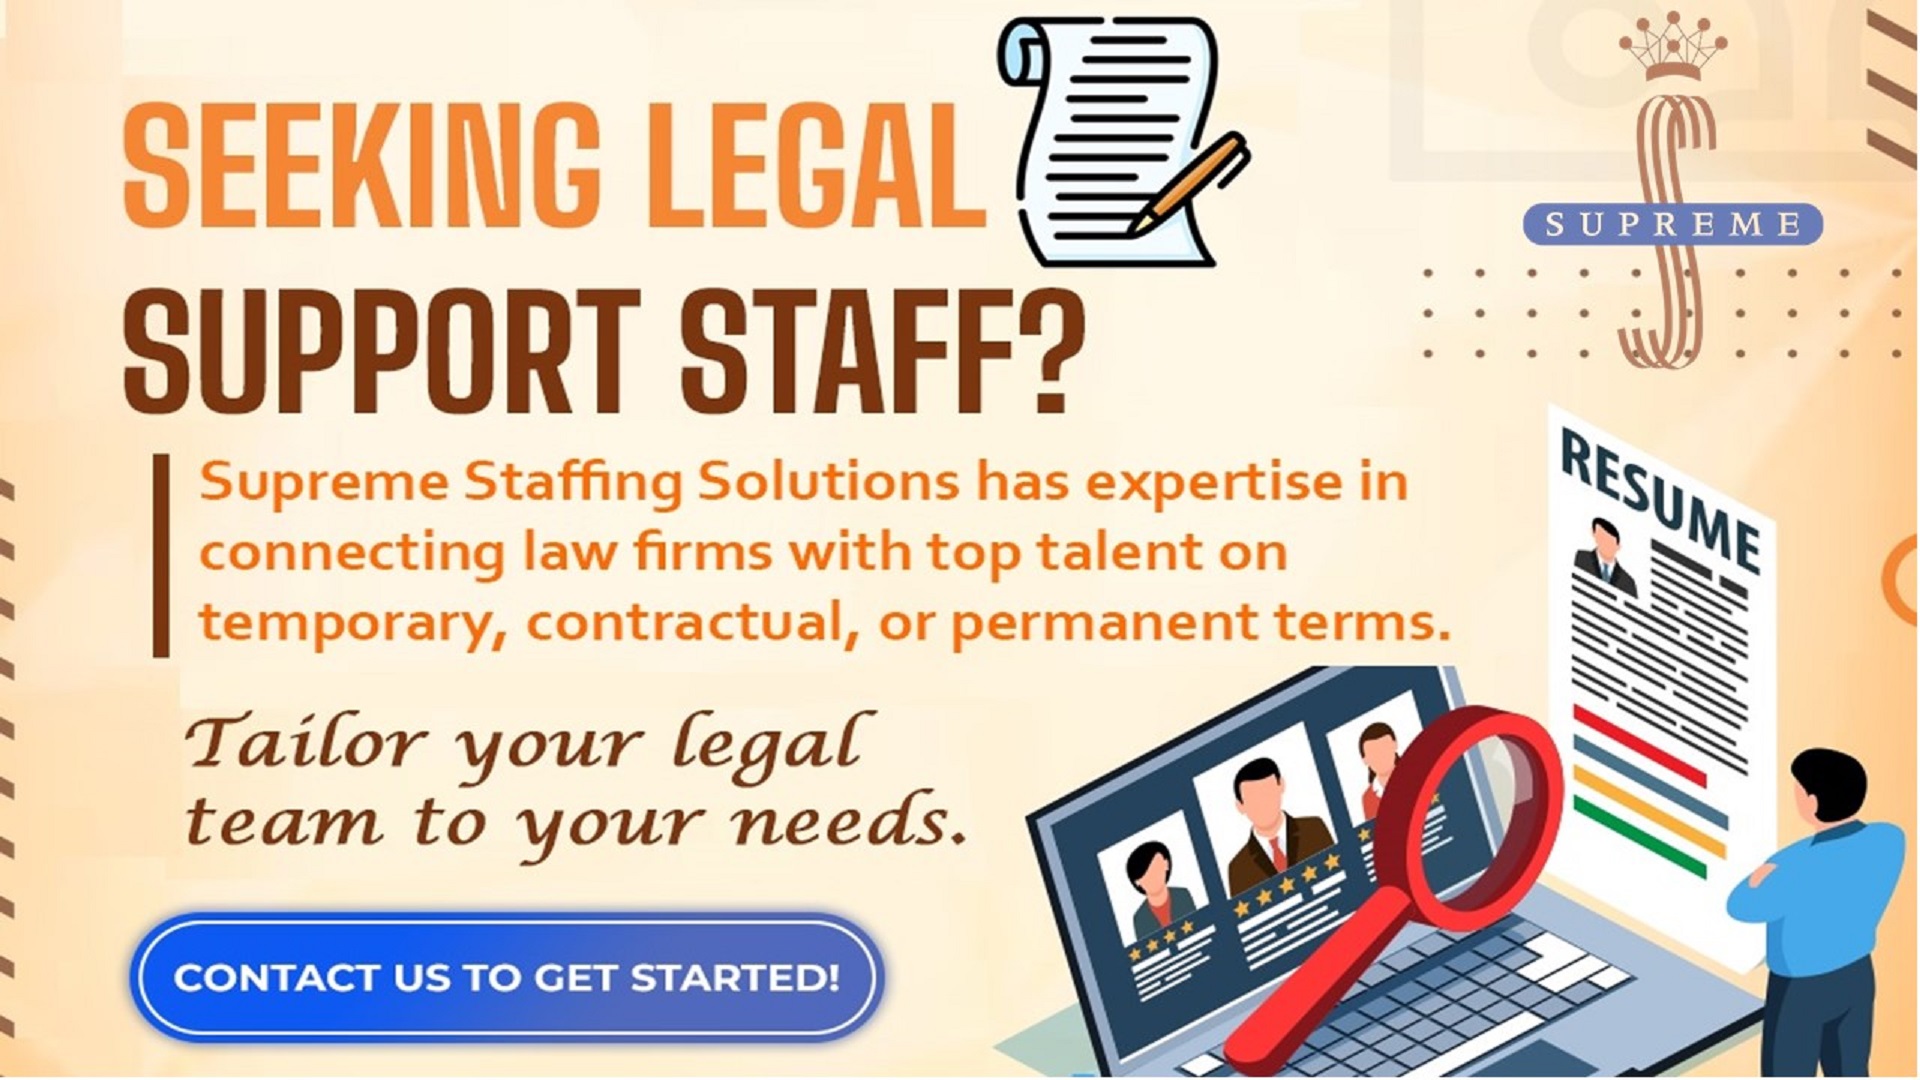 Benefits of Using Legal Staffing Agencies for Temporary Work - Massachusetts - Boston ID1513064